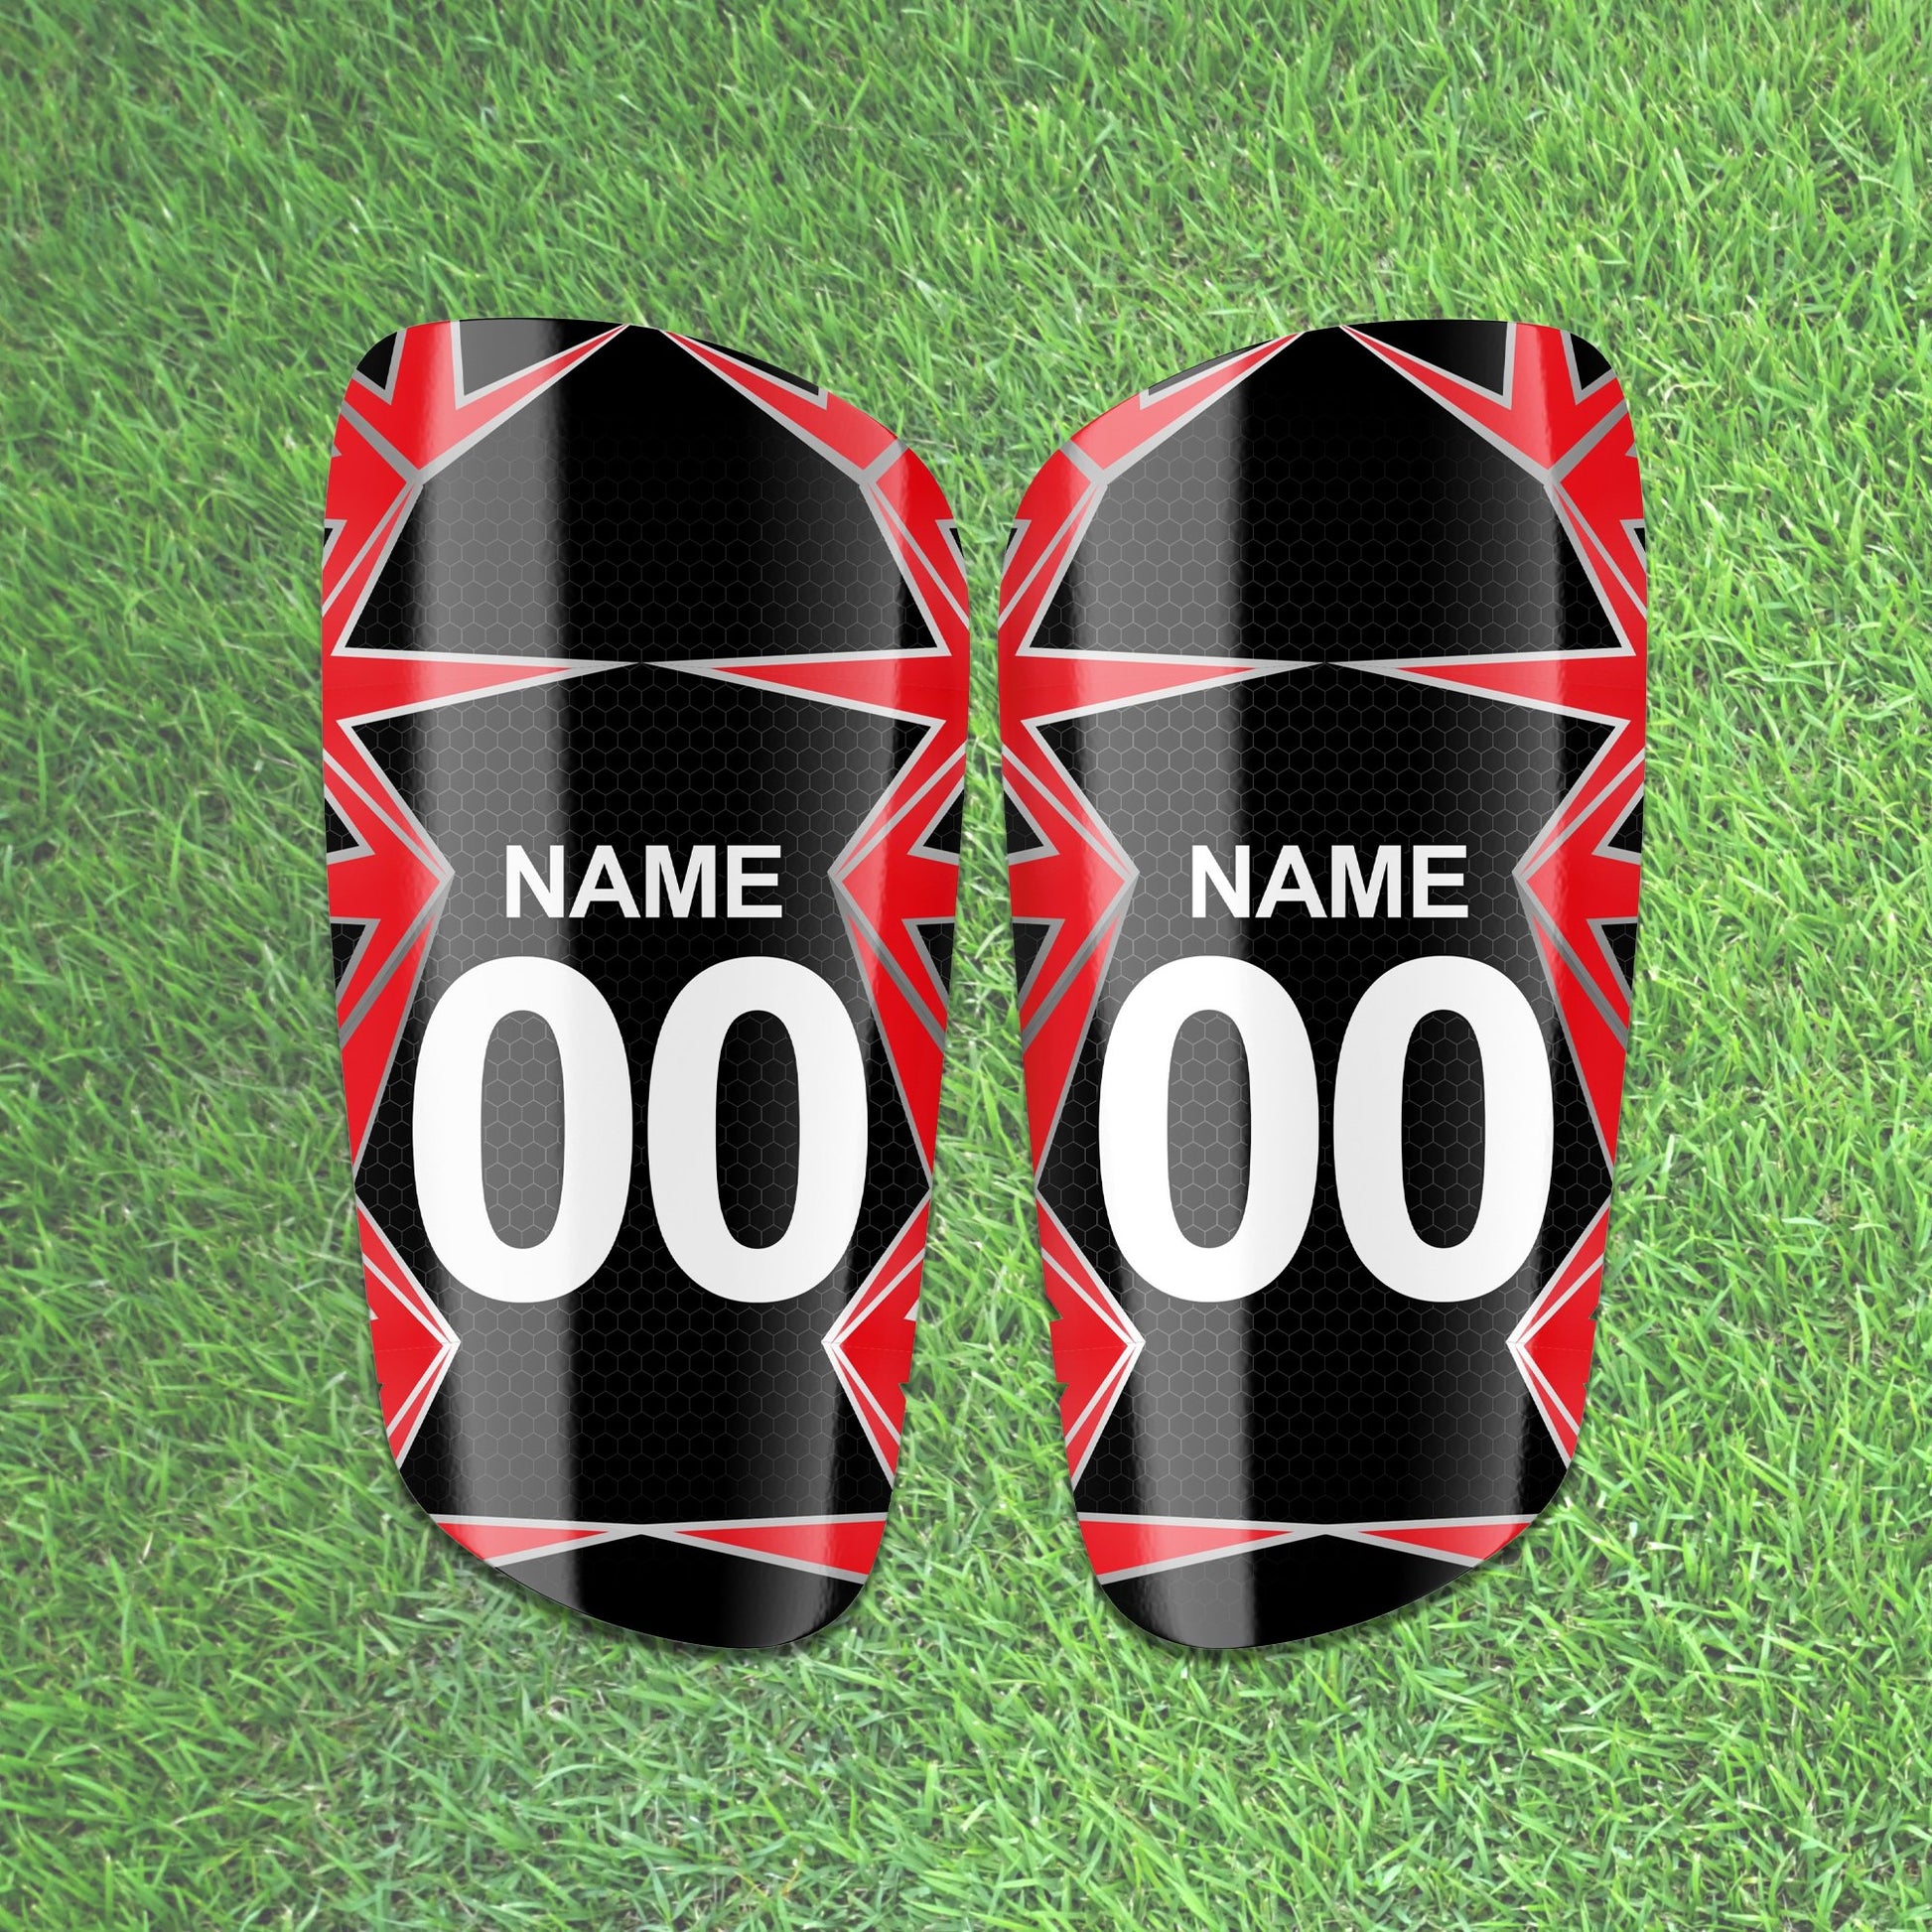 Red and Black Machine Sports Shin Pads - Noons UK